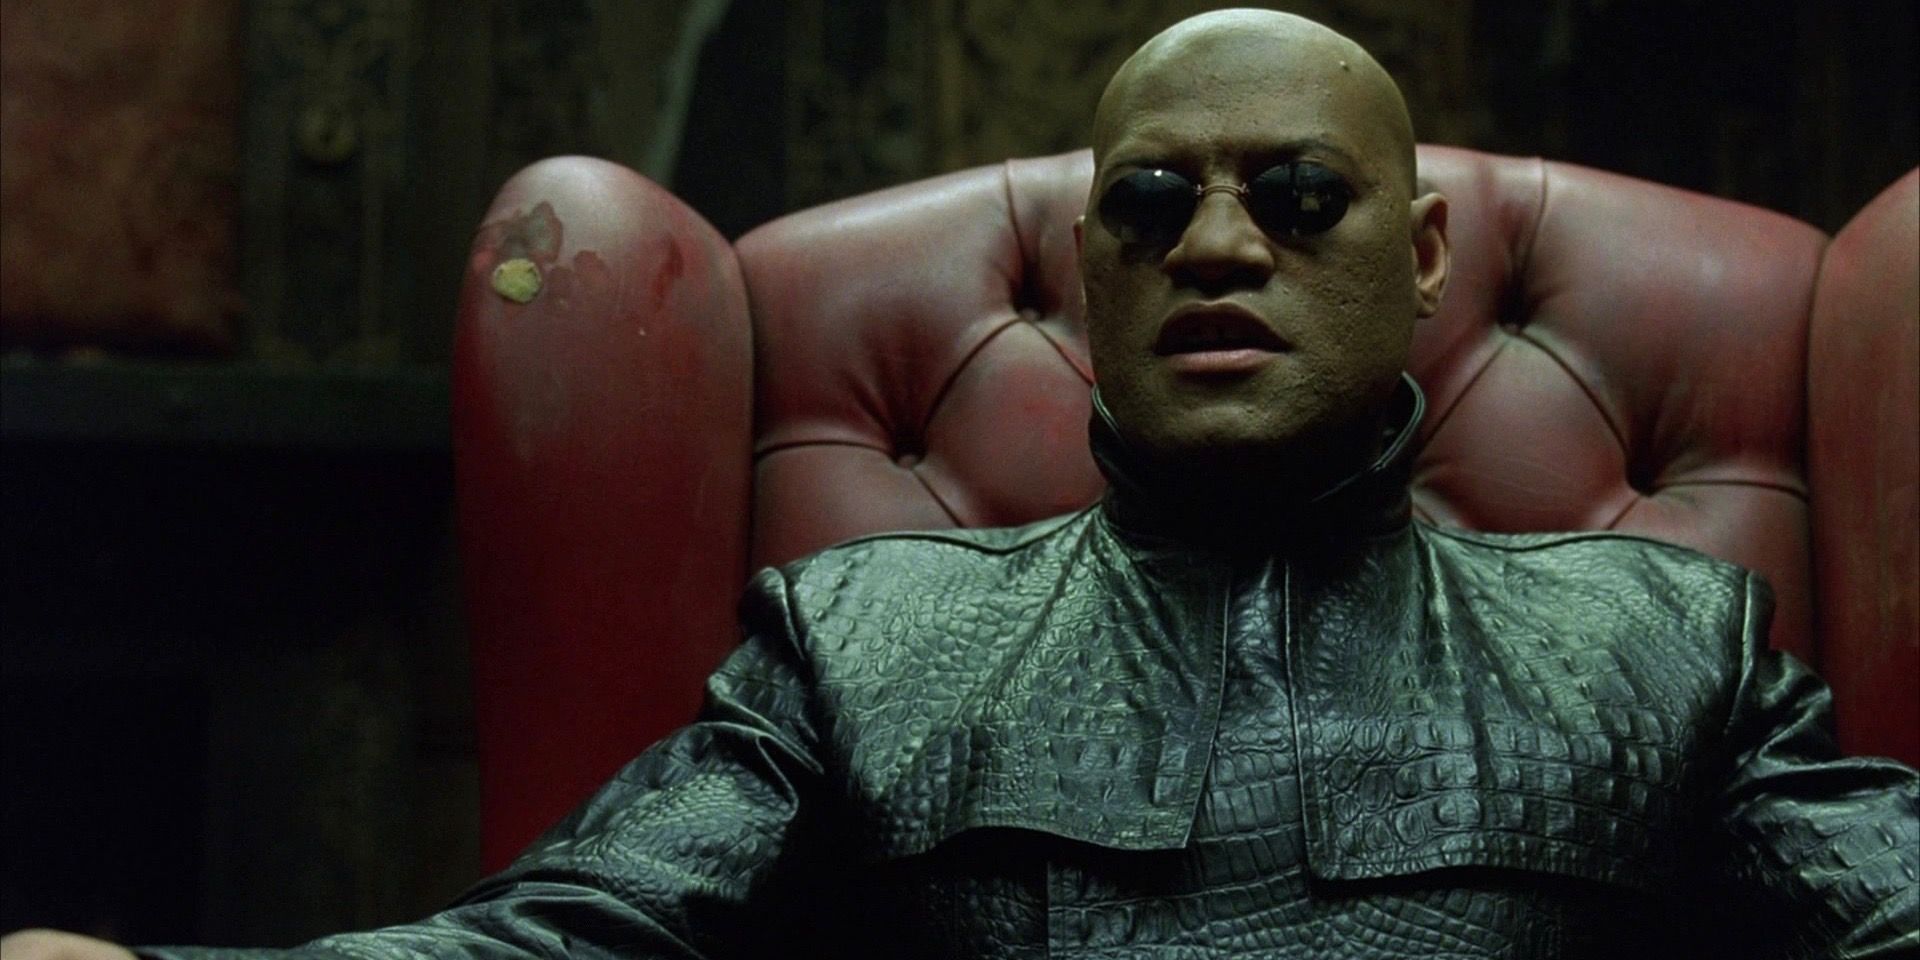 An image of Morpheus sitting in an armchair in The Matrix